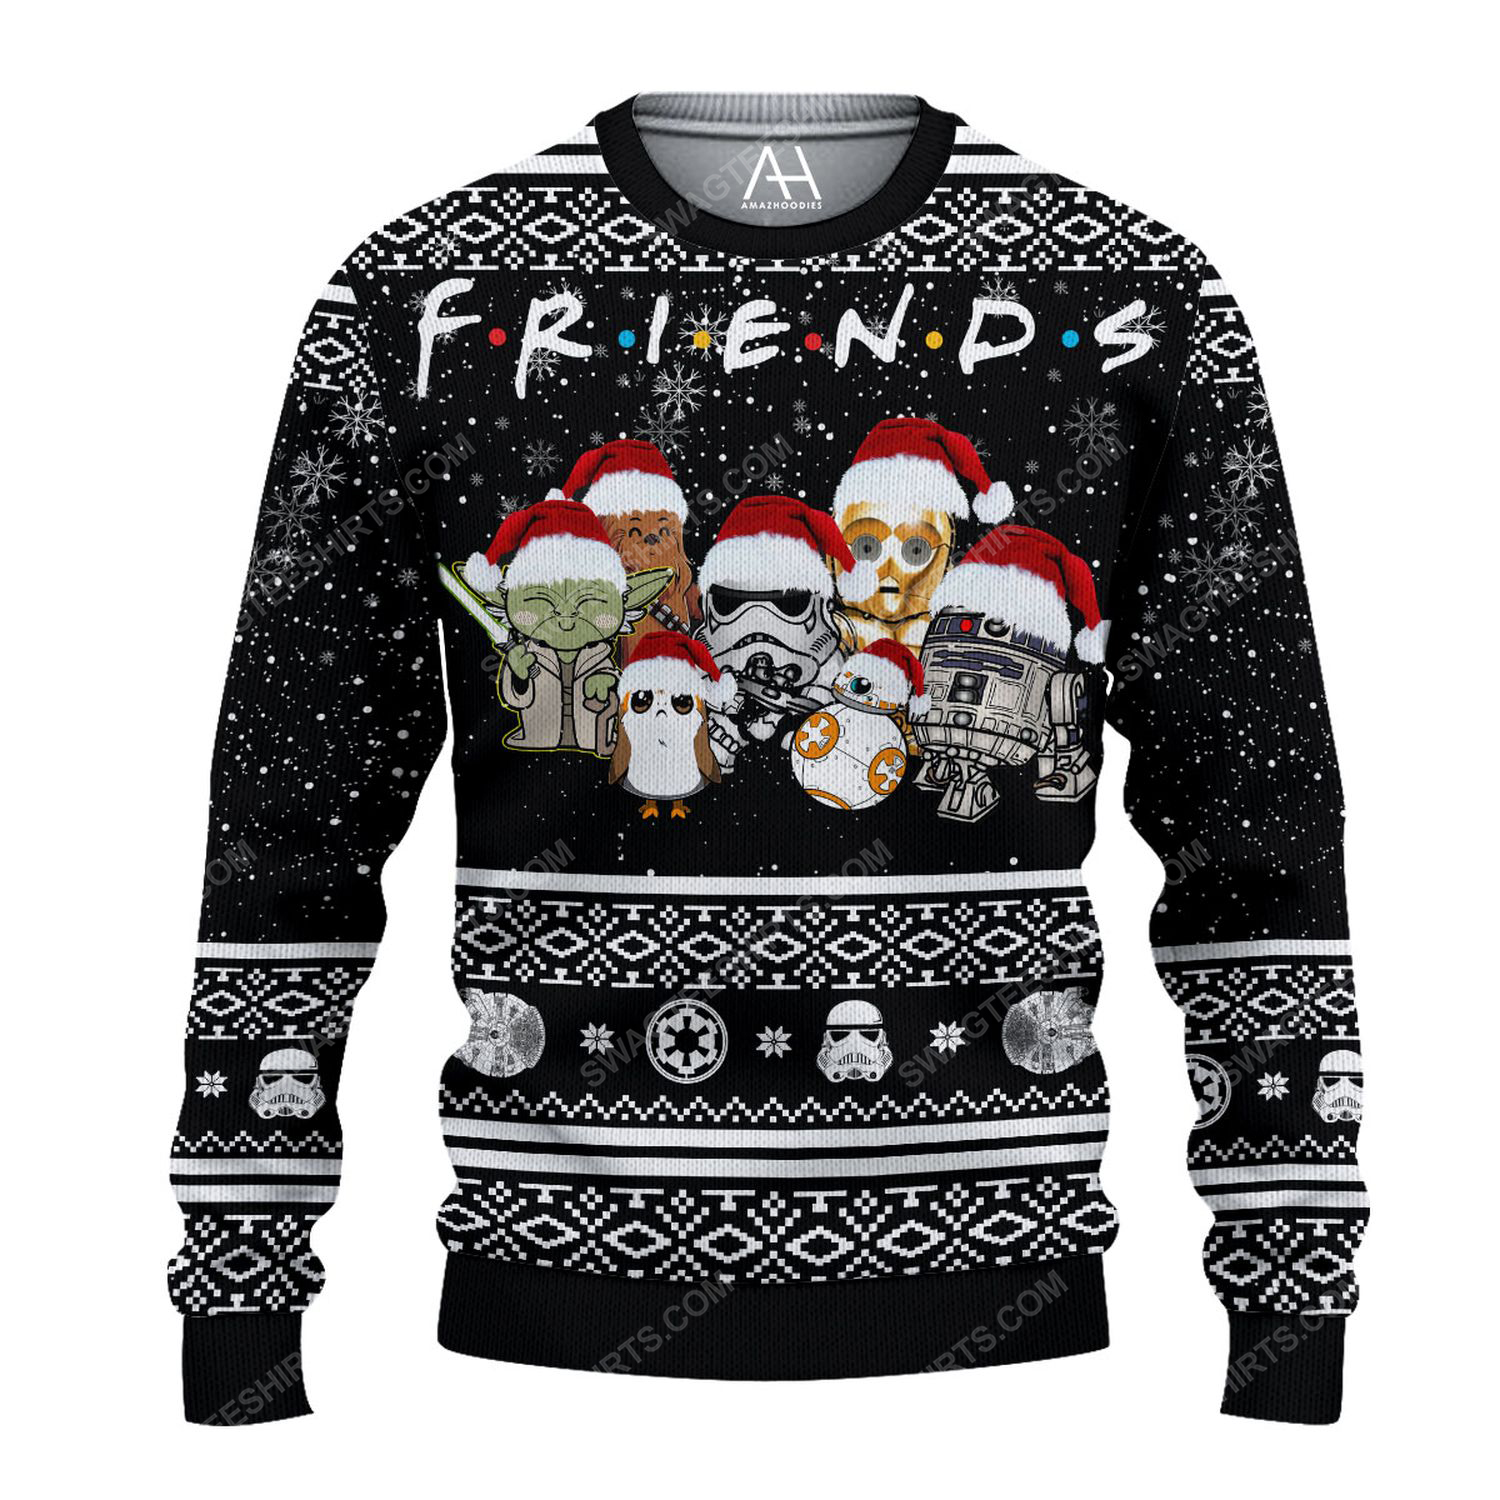 Friends tv show star wars chibi ugly christmas sweater 1 - Copy (3)